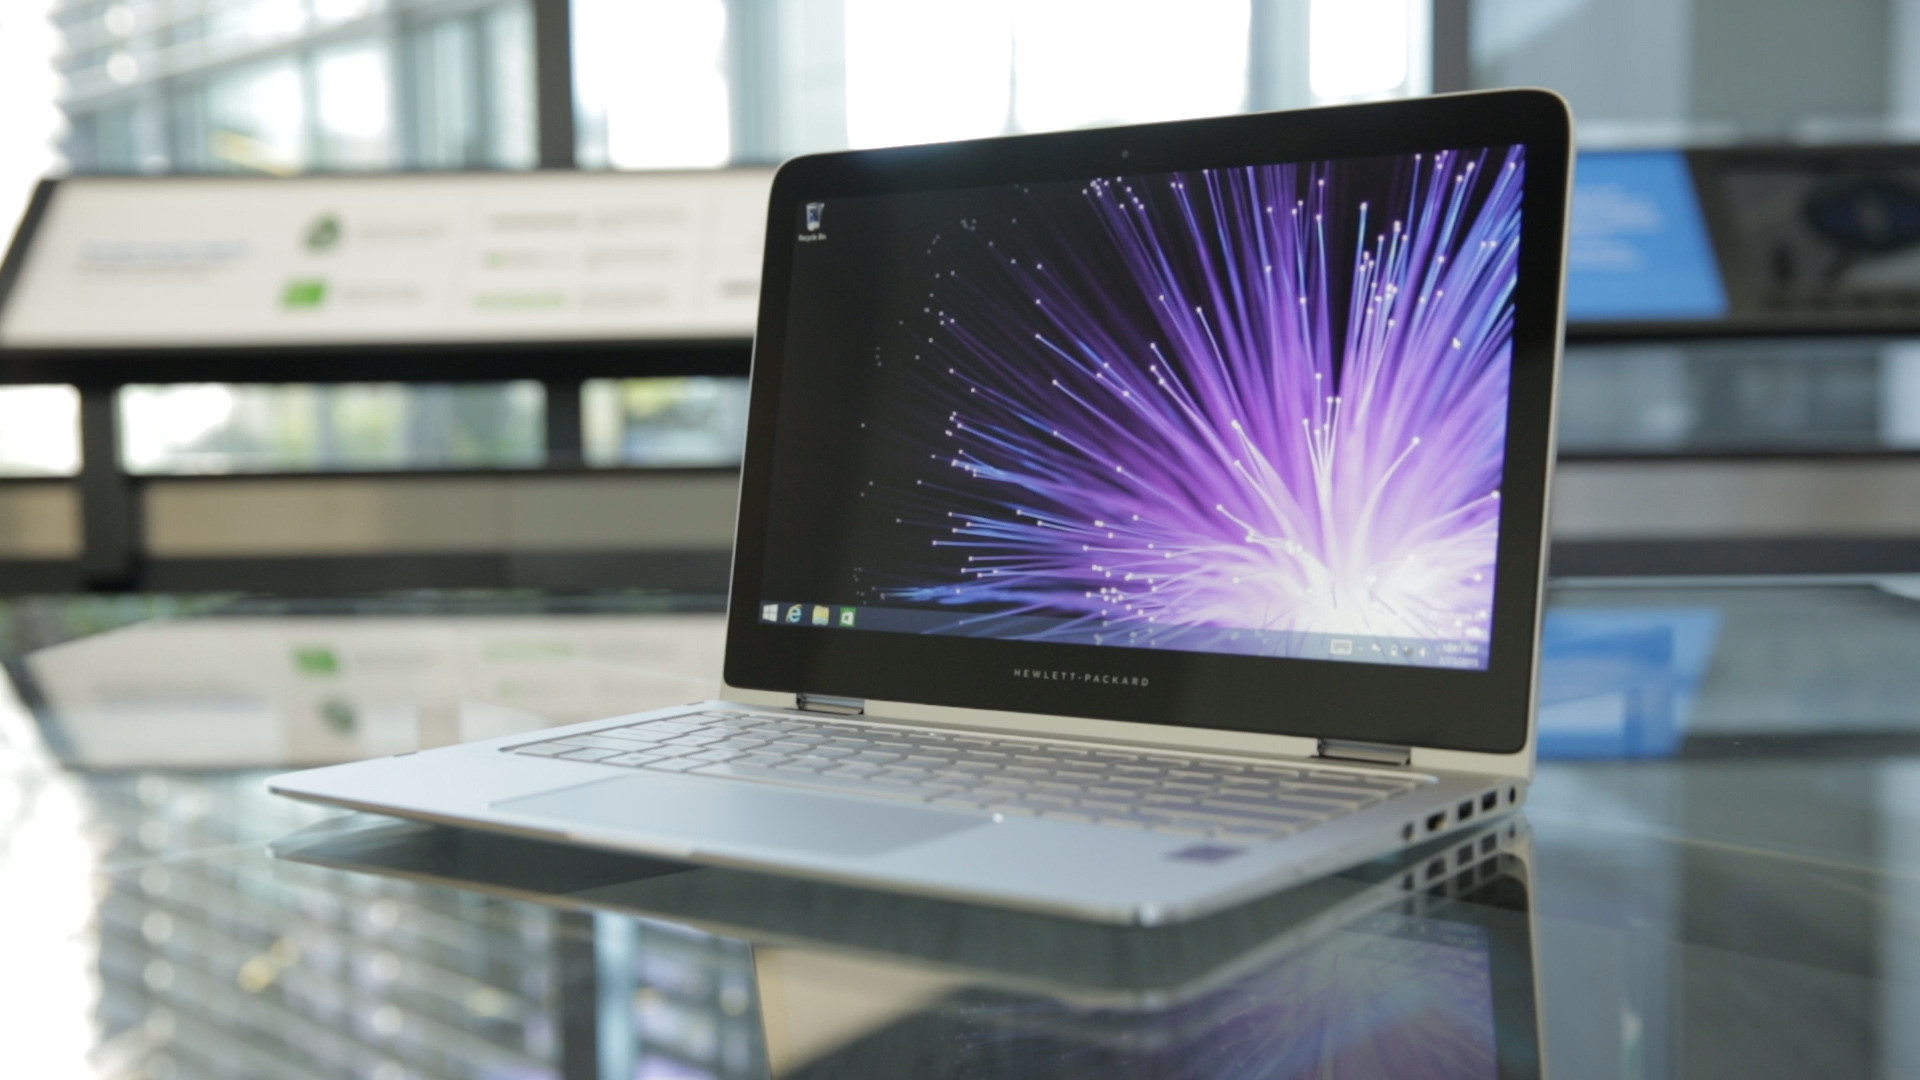 1920x1080 HP Spectre x360: Hands-on with the beautiful convertible | Computerworld